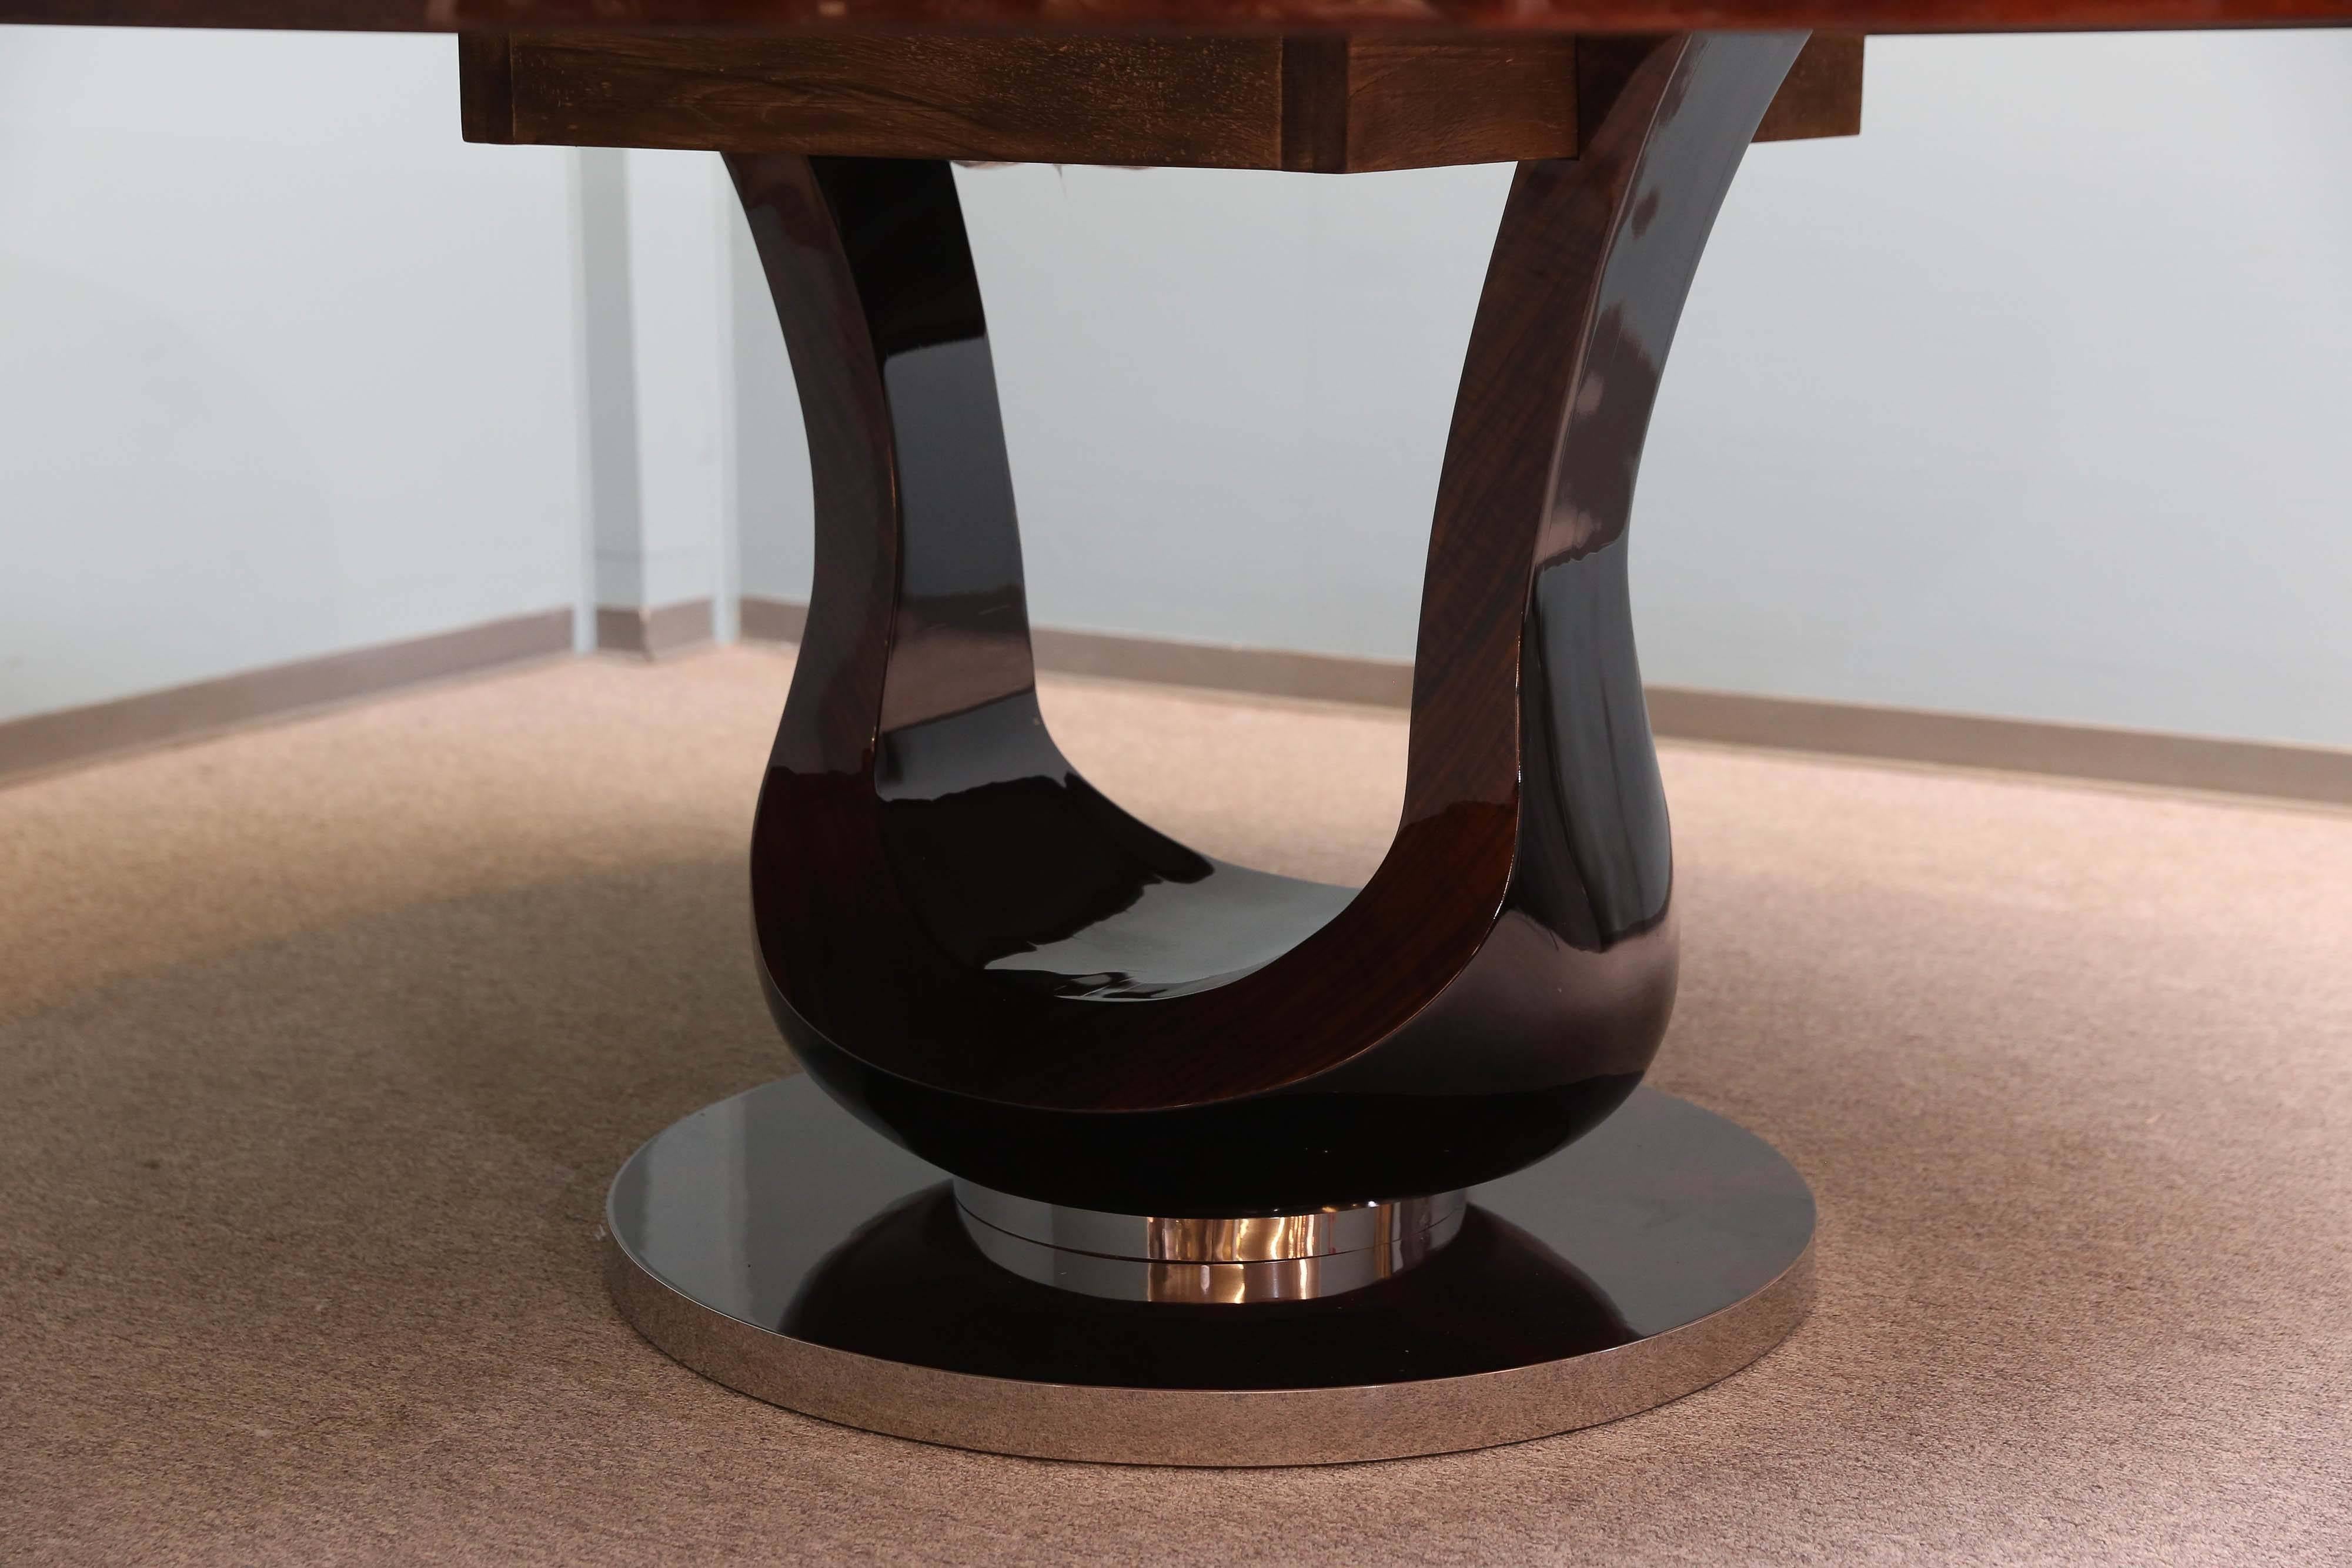 Round table top is made out of walnut and presents the beauty of the wood. The wood pattern is placed the certain way to create the imitation of sun rays, which are bursting out of focal point in the middle of the tabletop. It rests on a sculpted